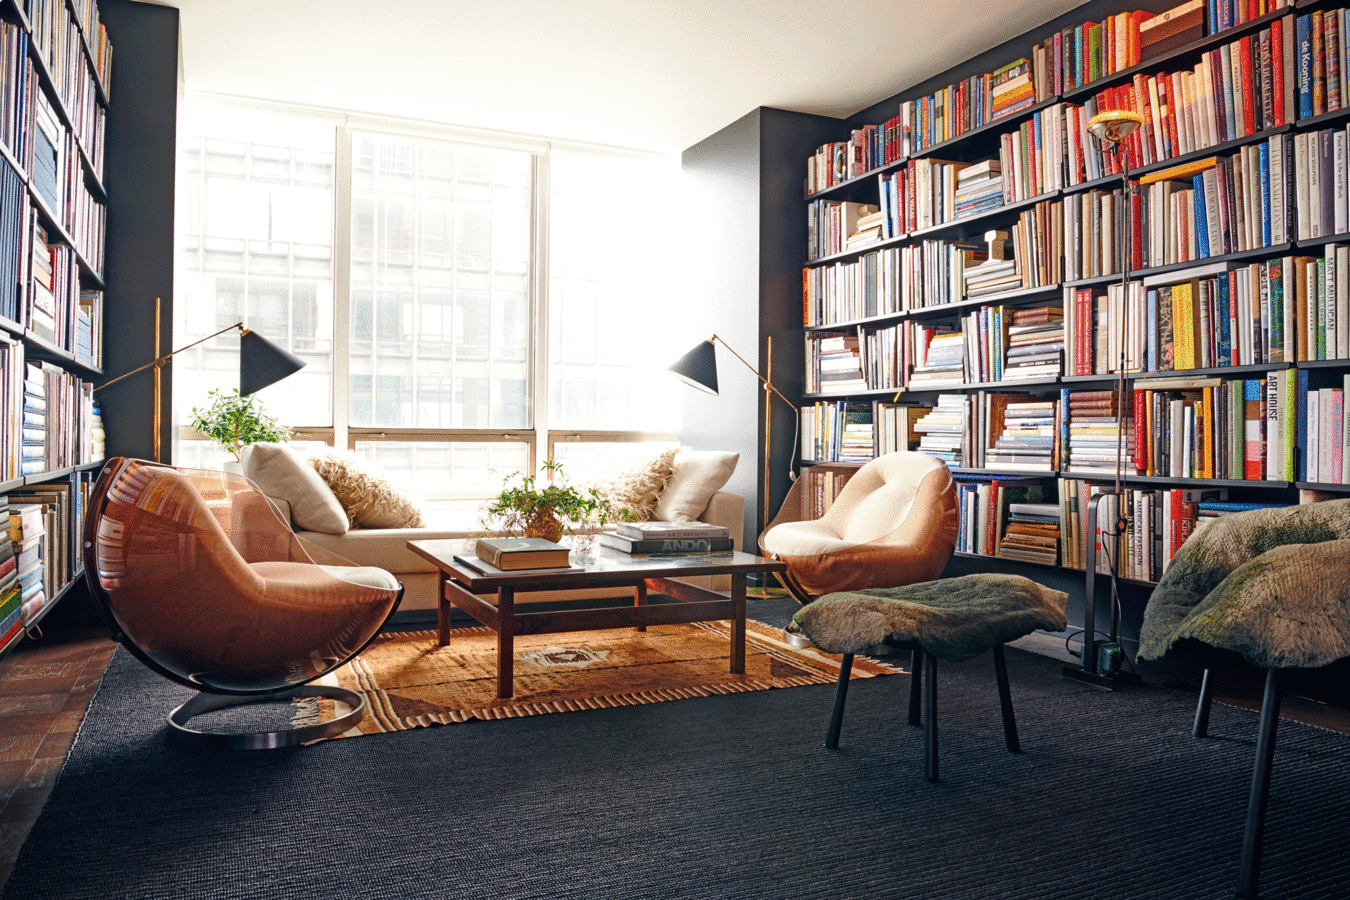 Library/guest room with window wall, two facing walls of floor-to-ceiling books, sofa, floor lamps and vintage armchairs.